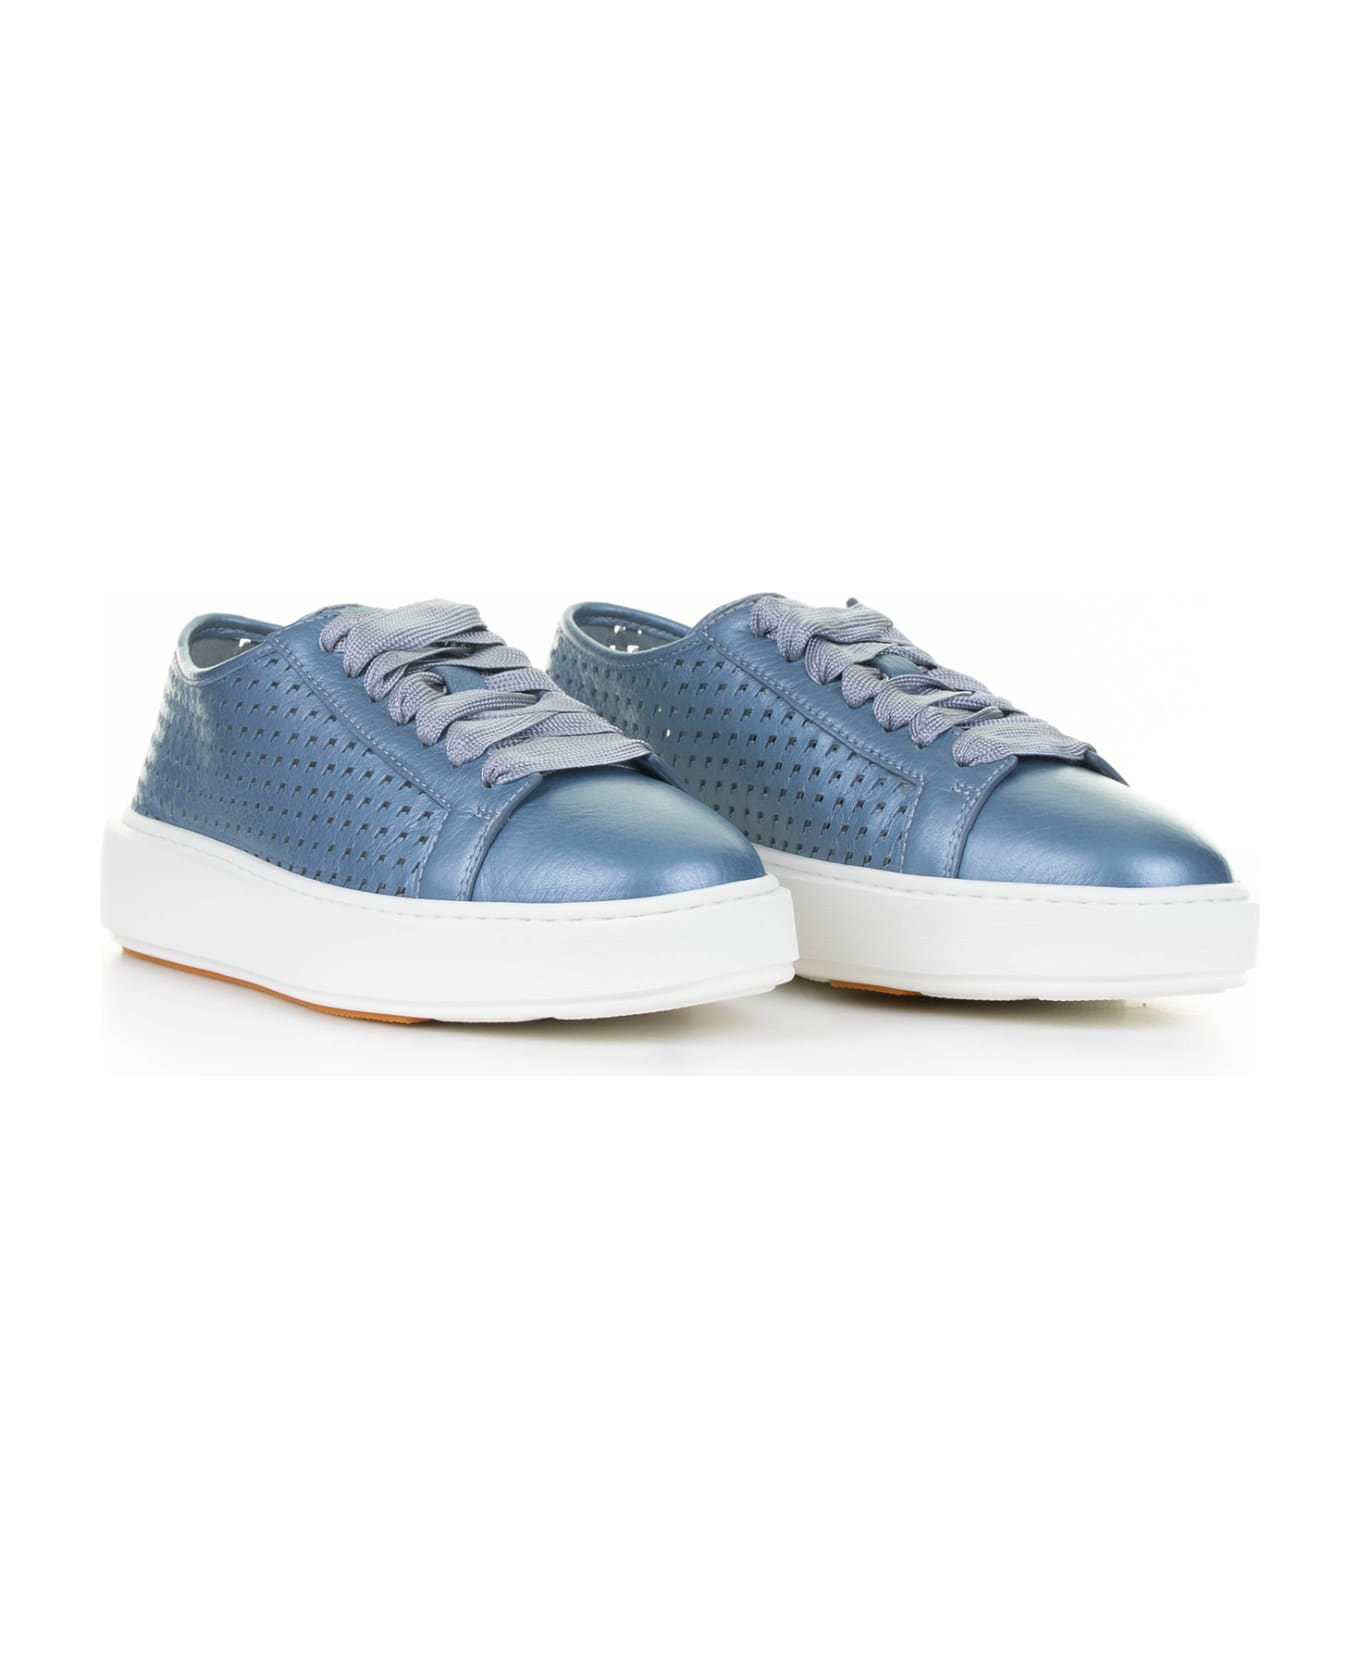 Santoni Light Blue Sneaker In Laminated Perforated Leather - LIGHT BLUE